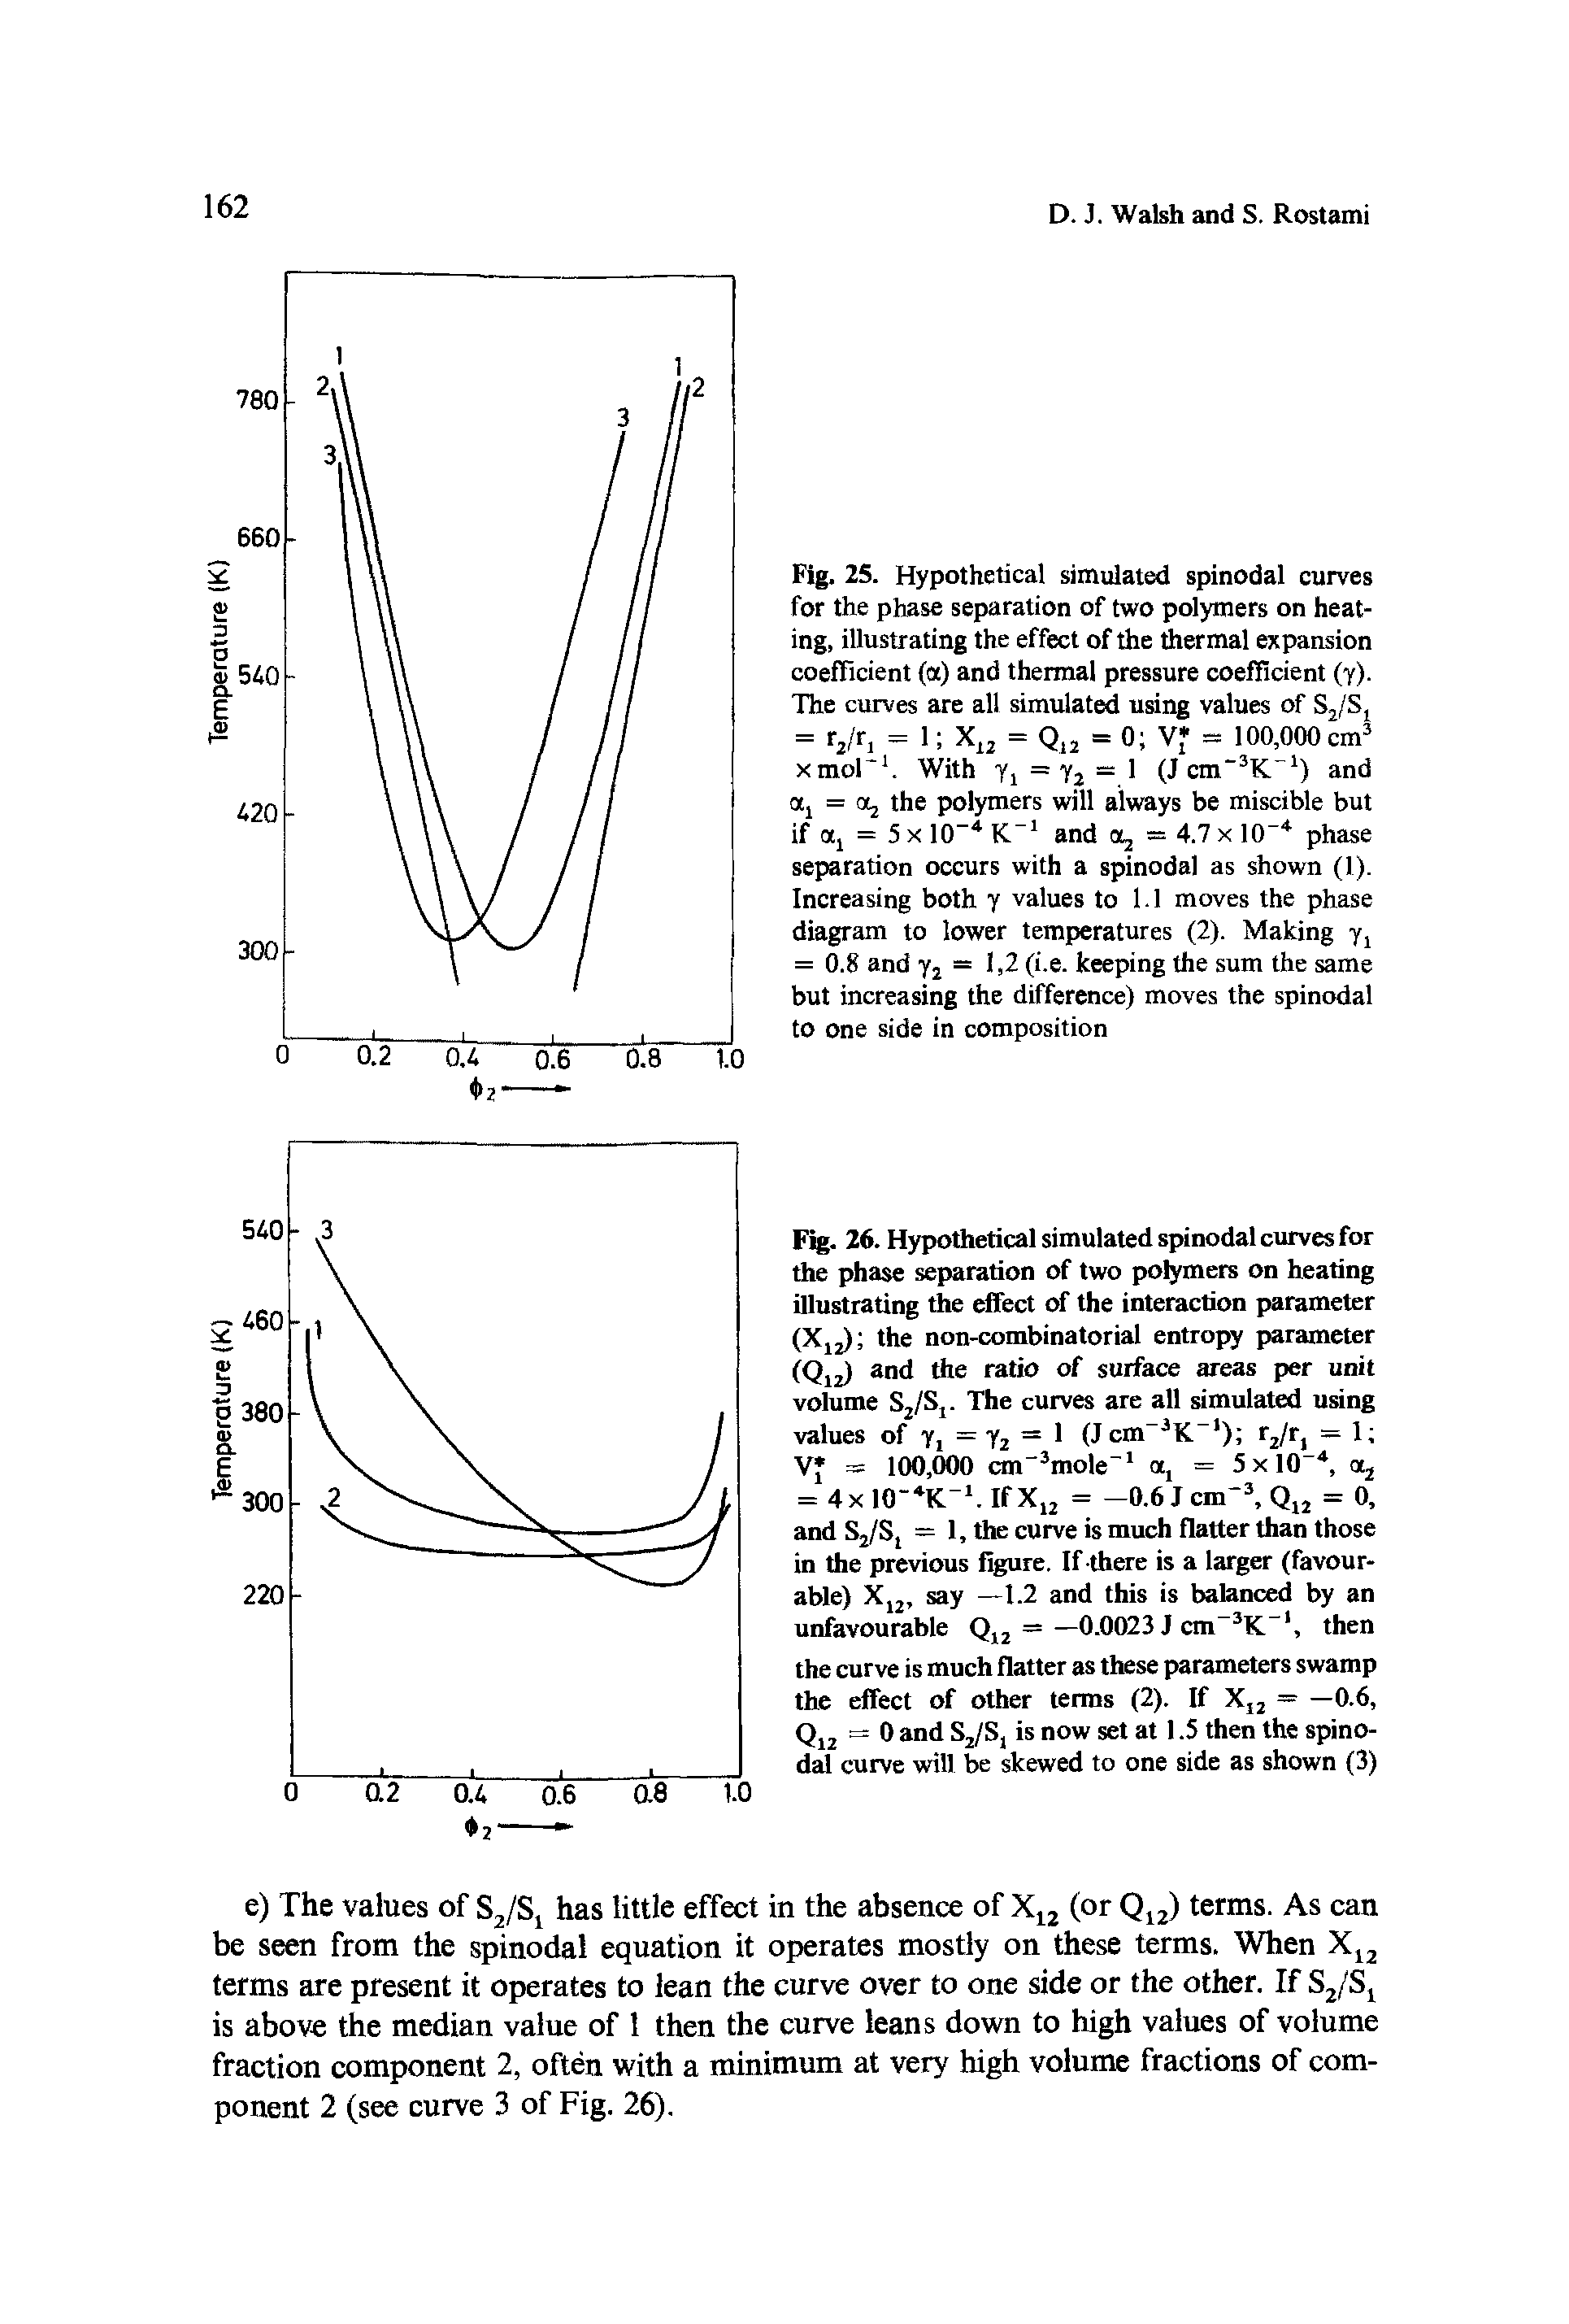 Fig. 25. Hypothetical simulated spinodal curves for the phase separation of two polymers on heating, illustrating the effect of the thermal expansion coefficient (a) and thermal pressure coefficient (y). The curves are all simulated using values of S /Sj = rj/fj = 1 X j = = 0 Vf = 100,000 cm ...